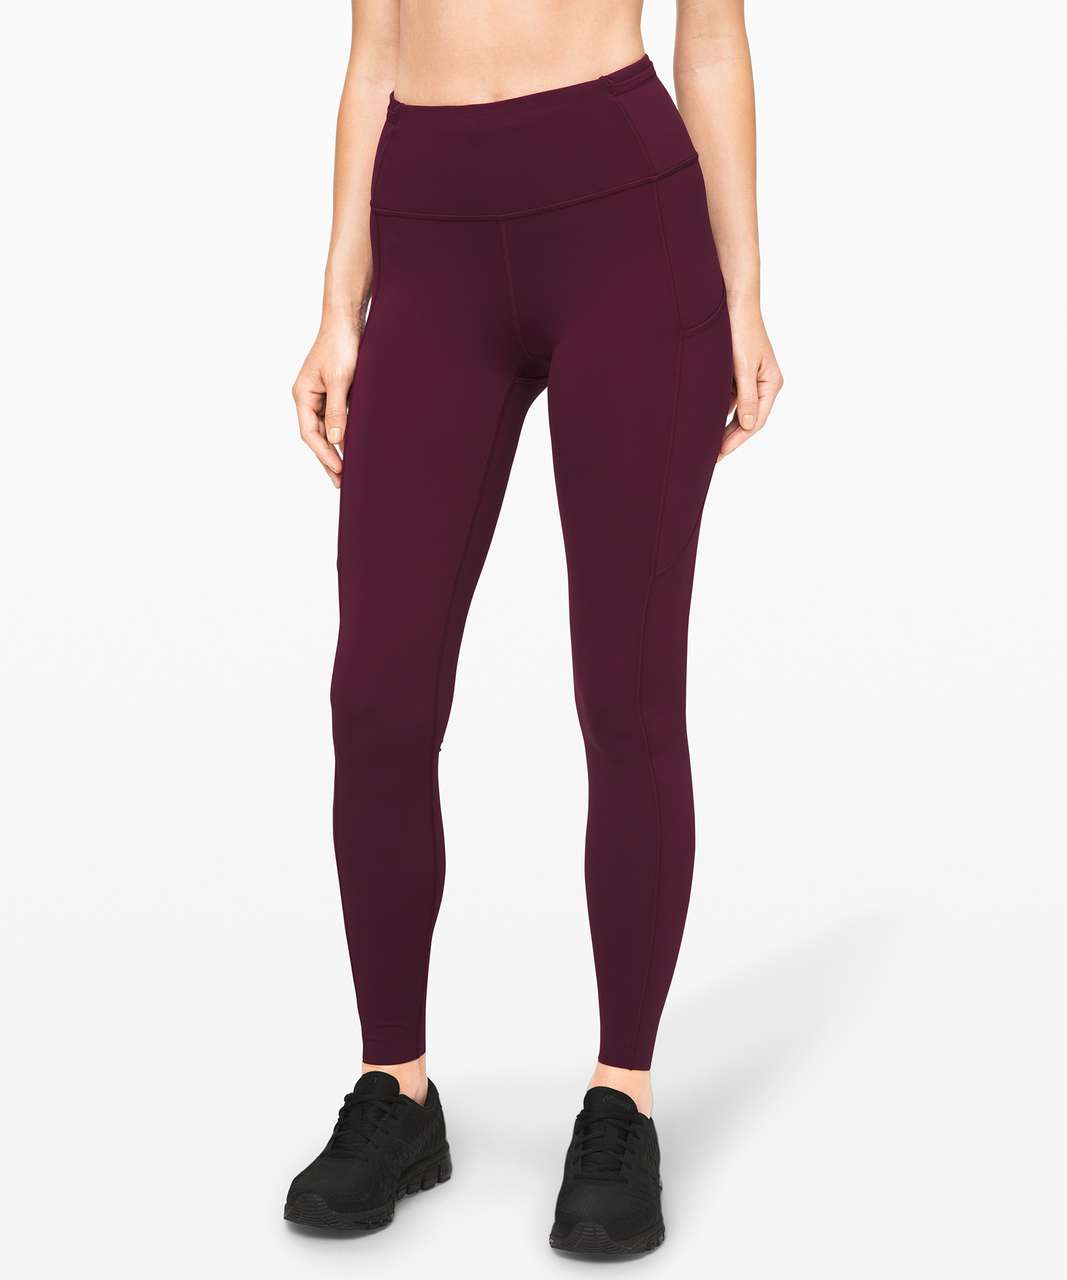 Lululemon Fast and Free Tight 28" *Non-Reflective - Marvel